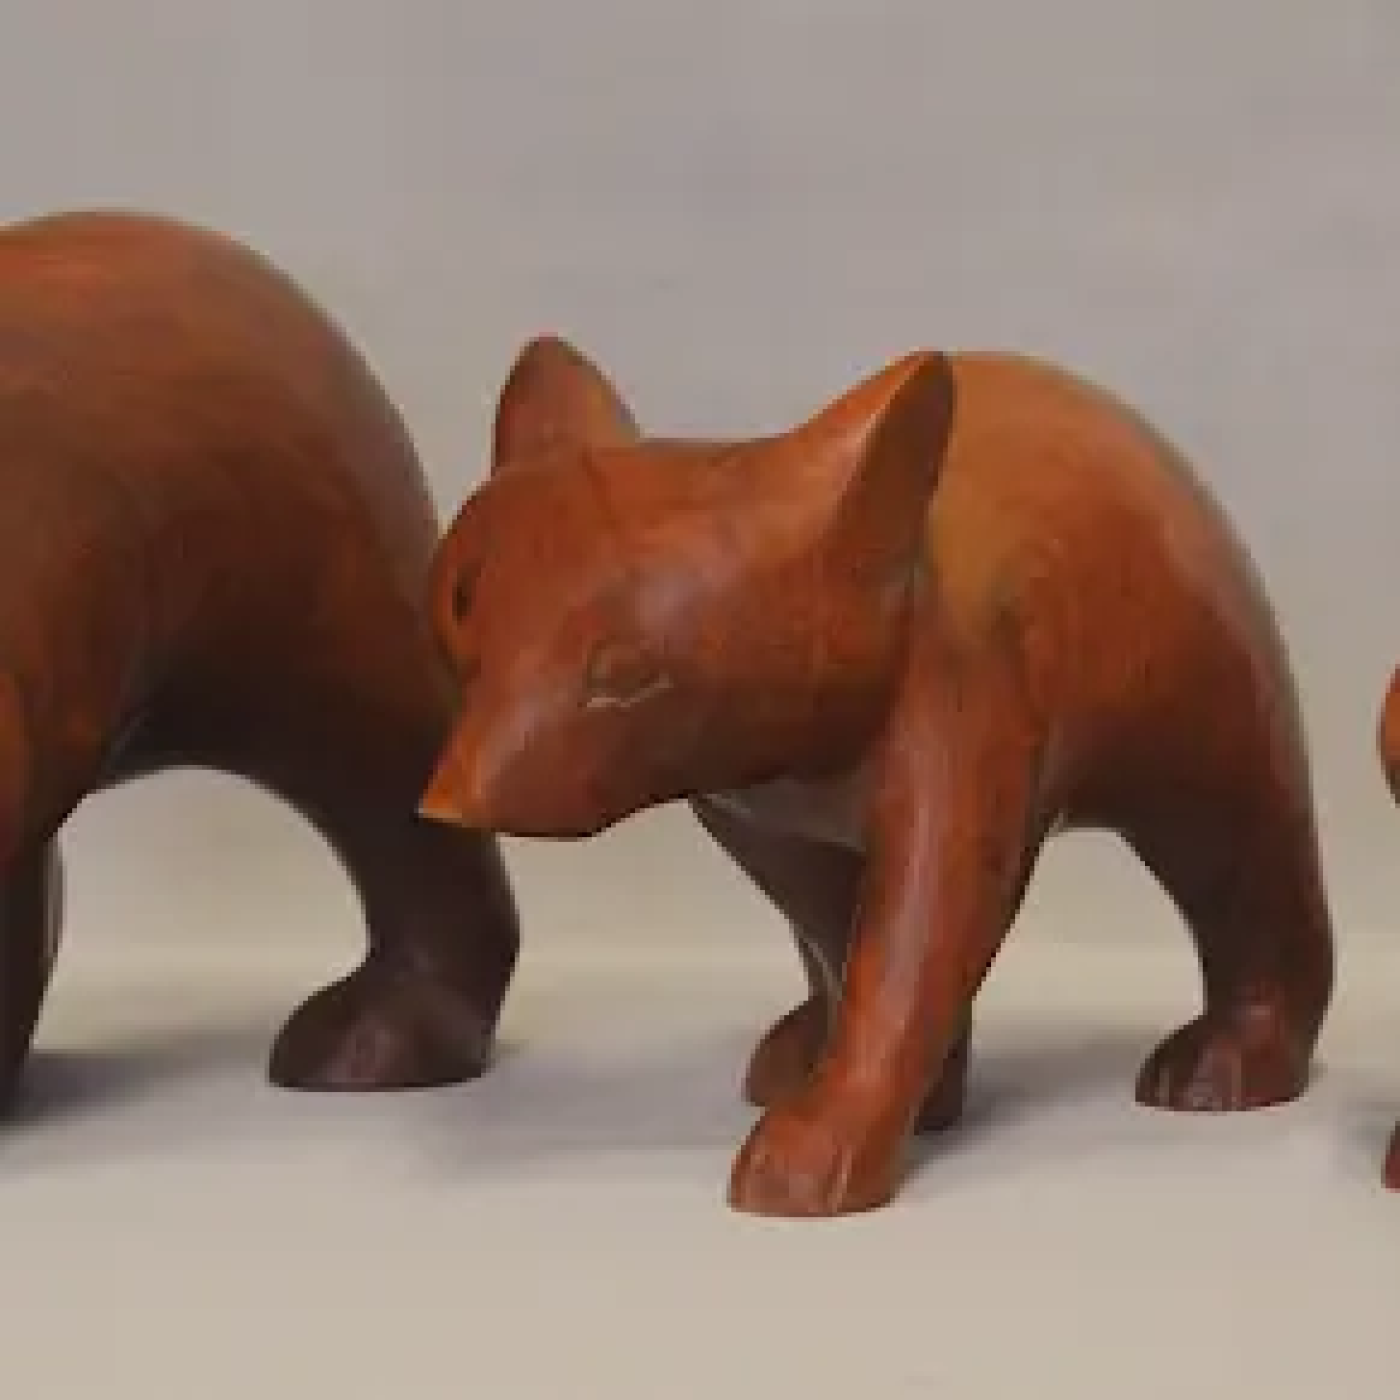 Wooden Bears by Amanda Crowe. From the BIA Museum collection.